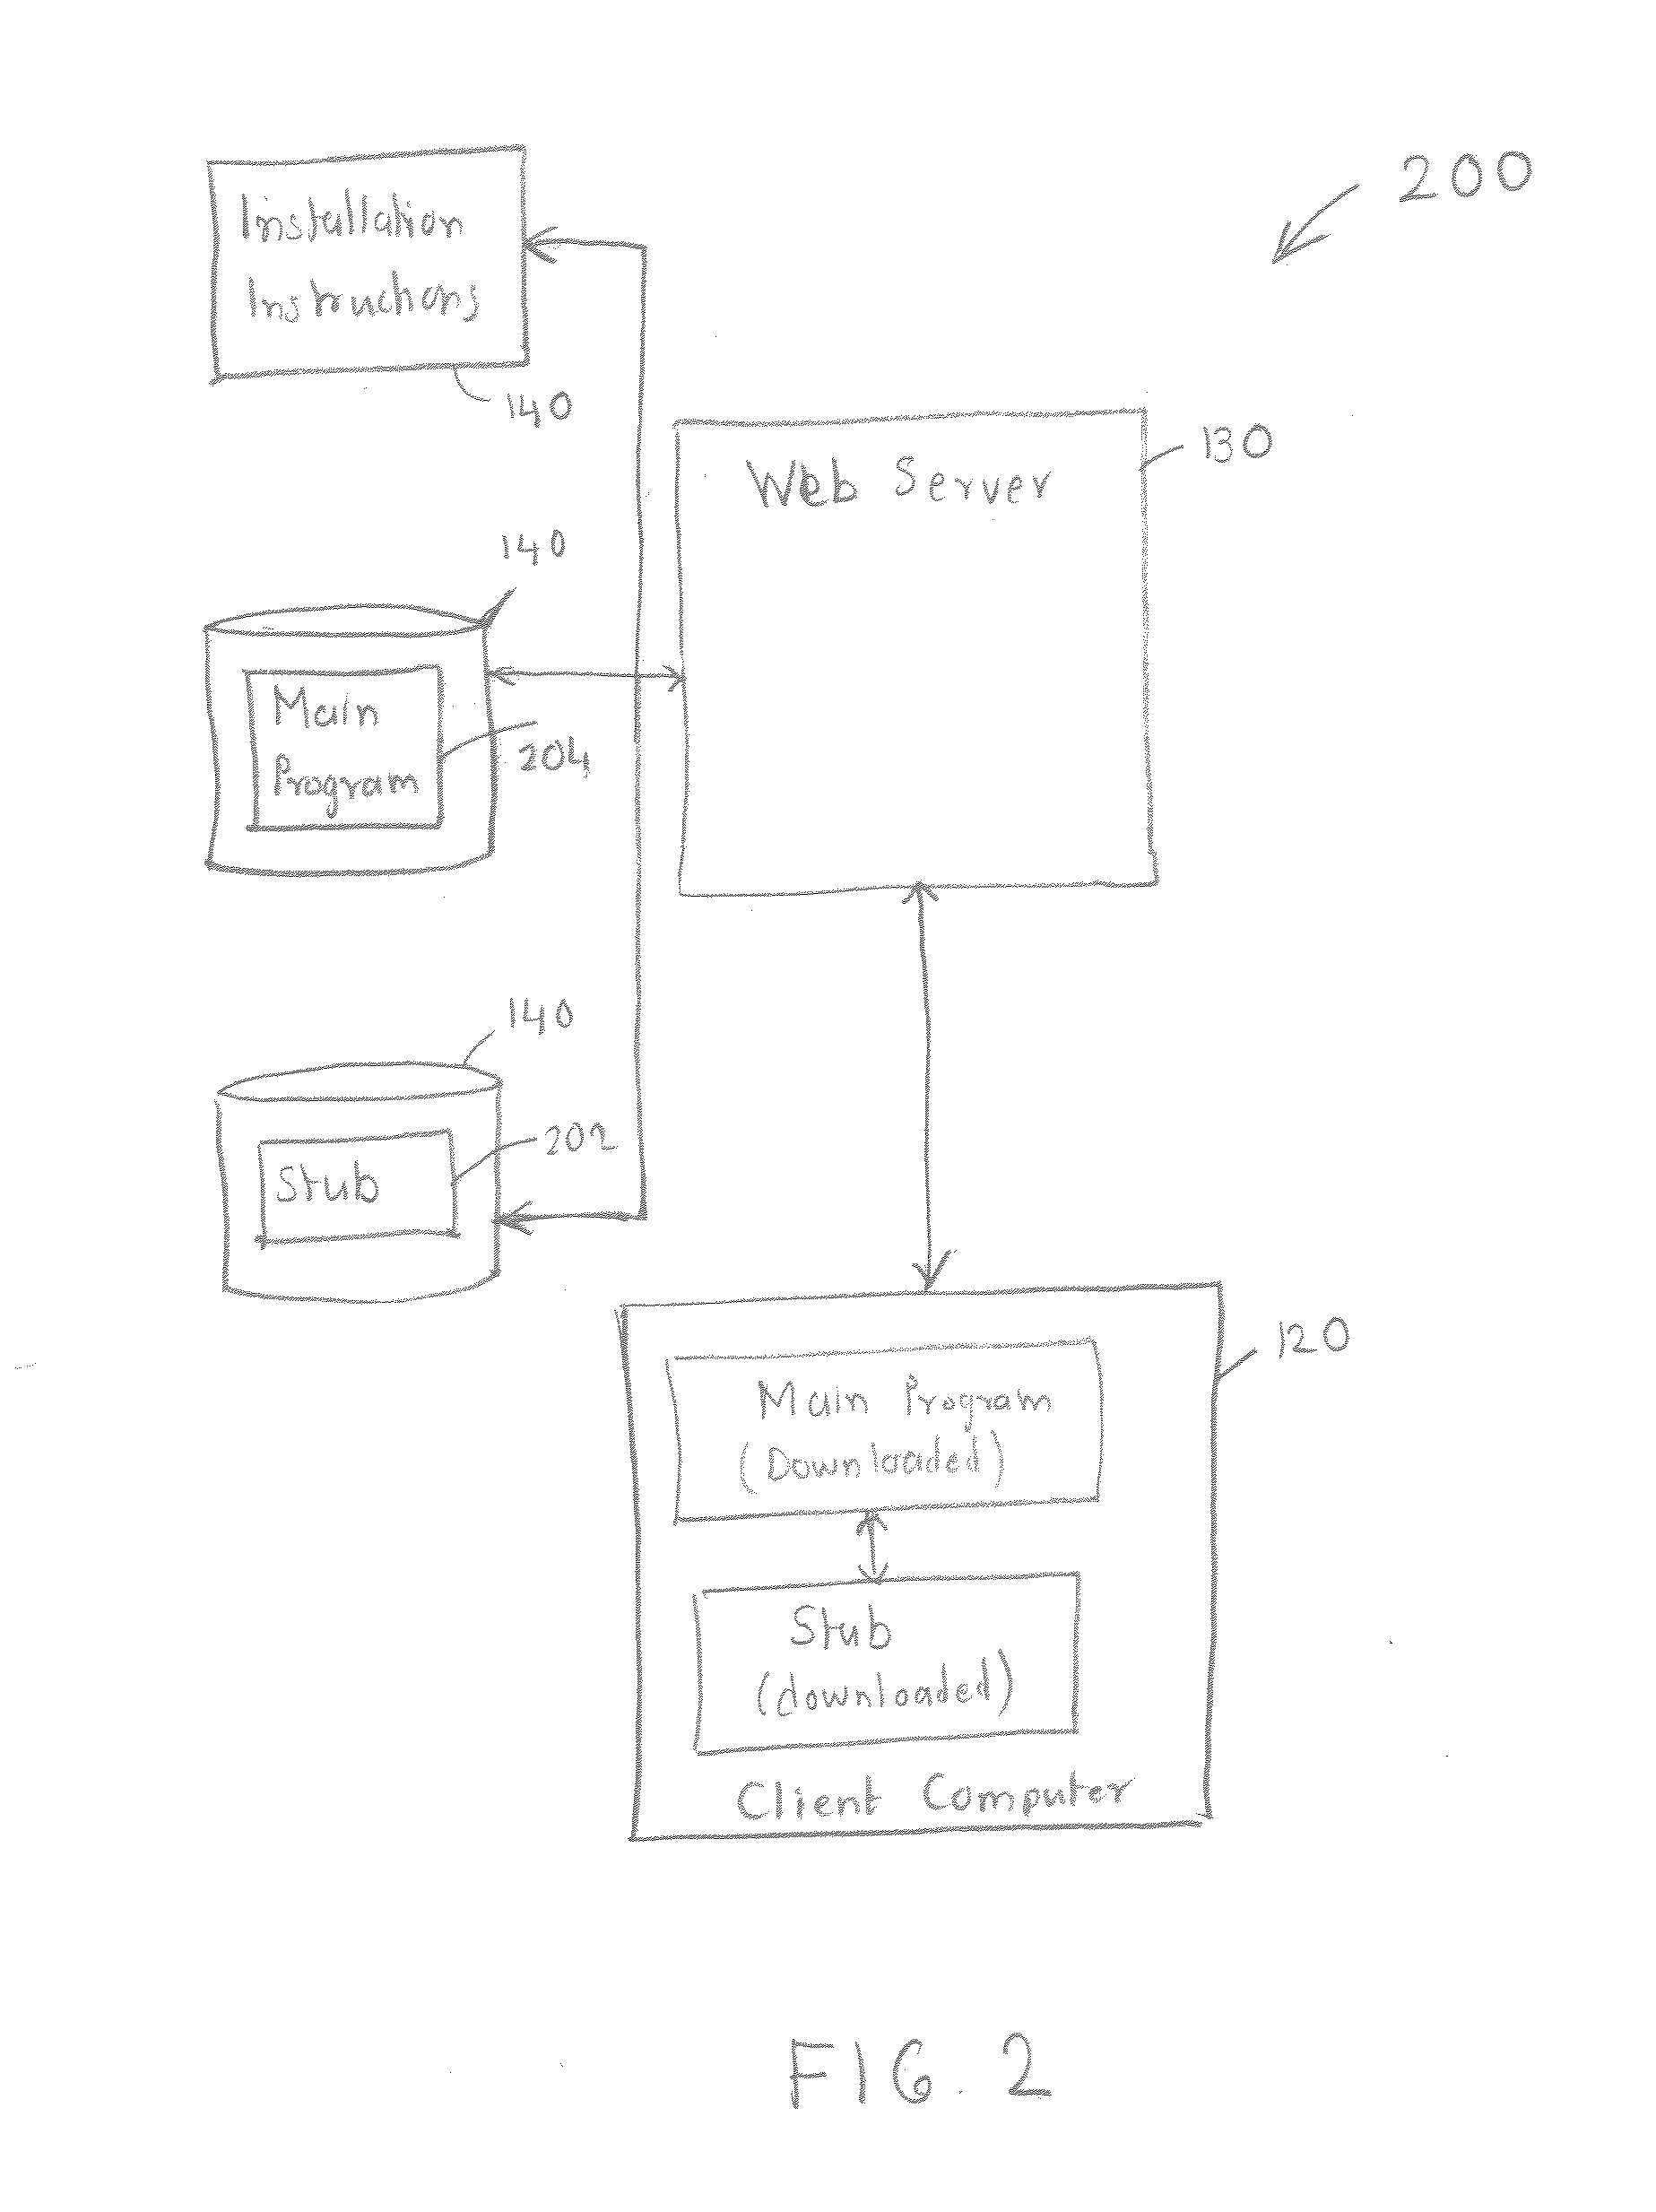 System and Method for Automating Installation and Updating of Third Party Software